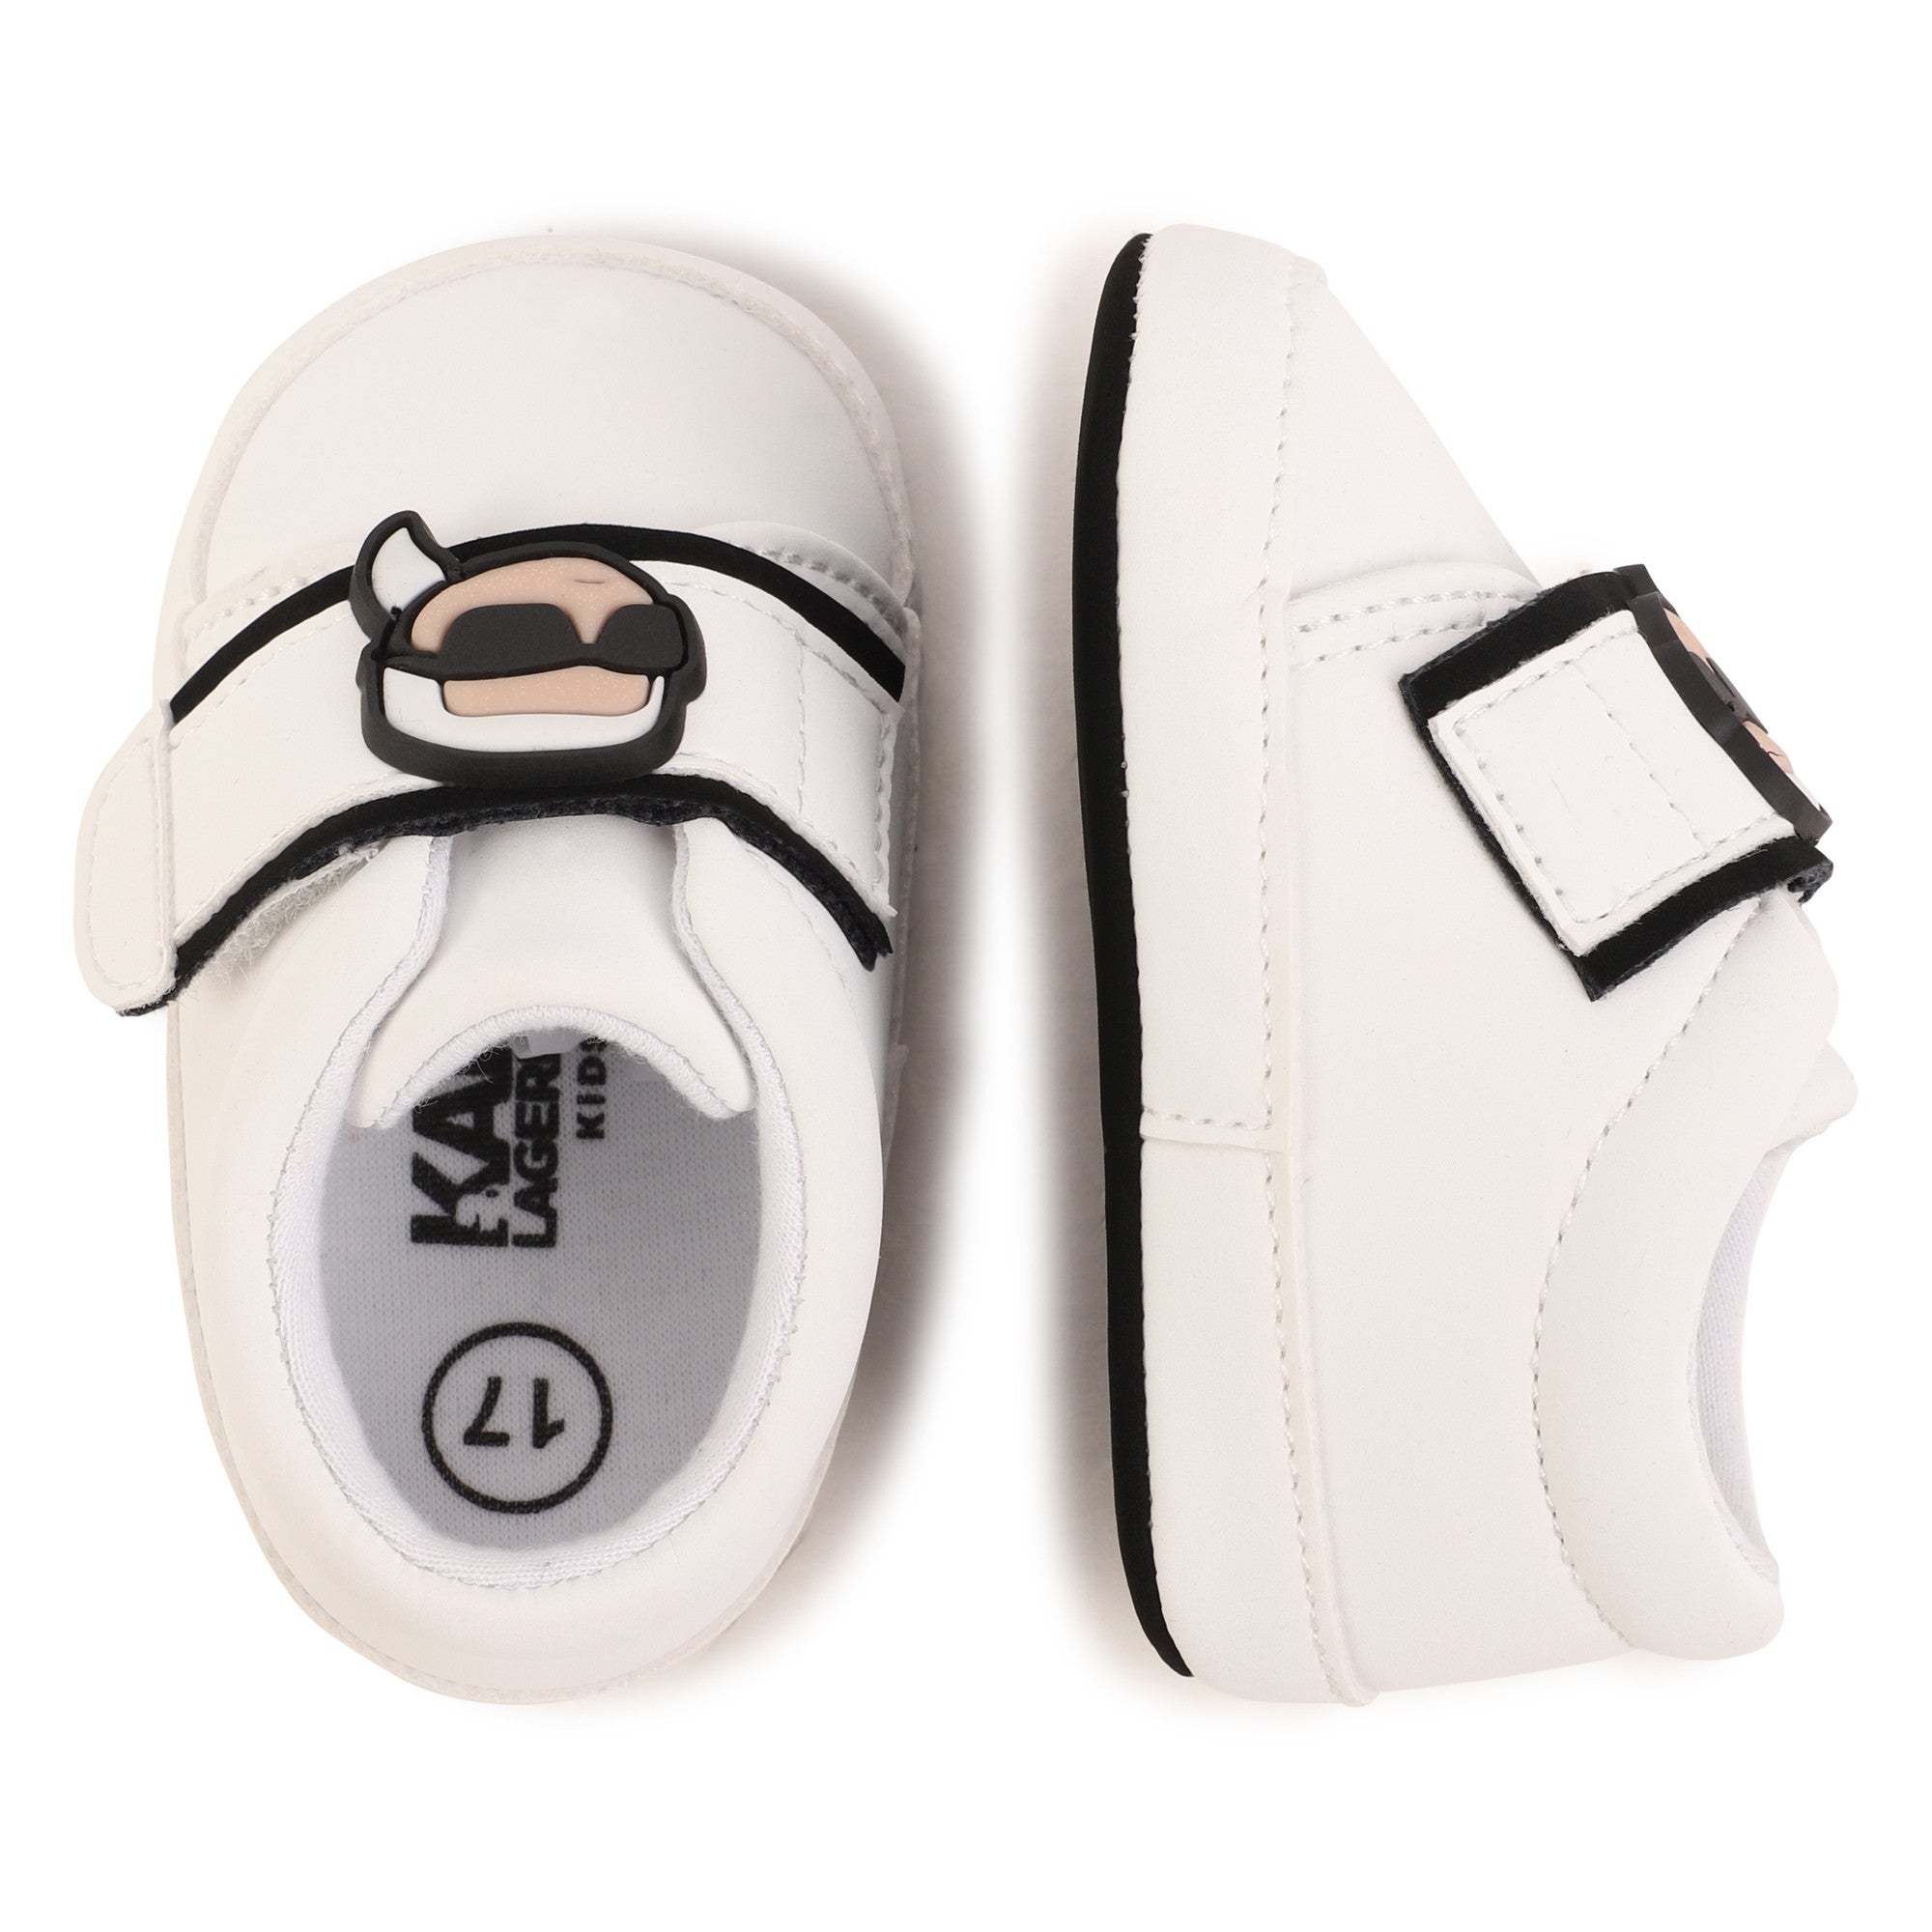 Karl Lagerfeld Baby Shoes